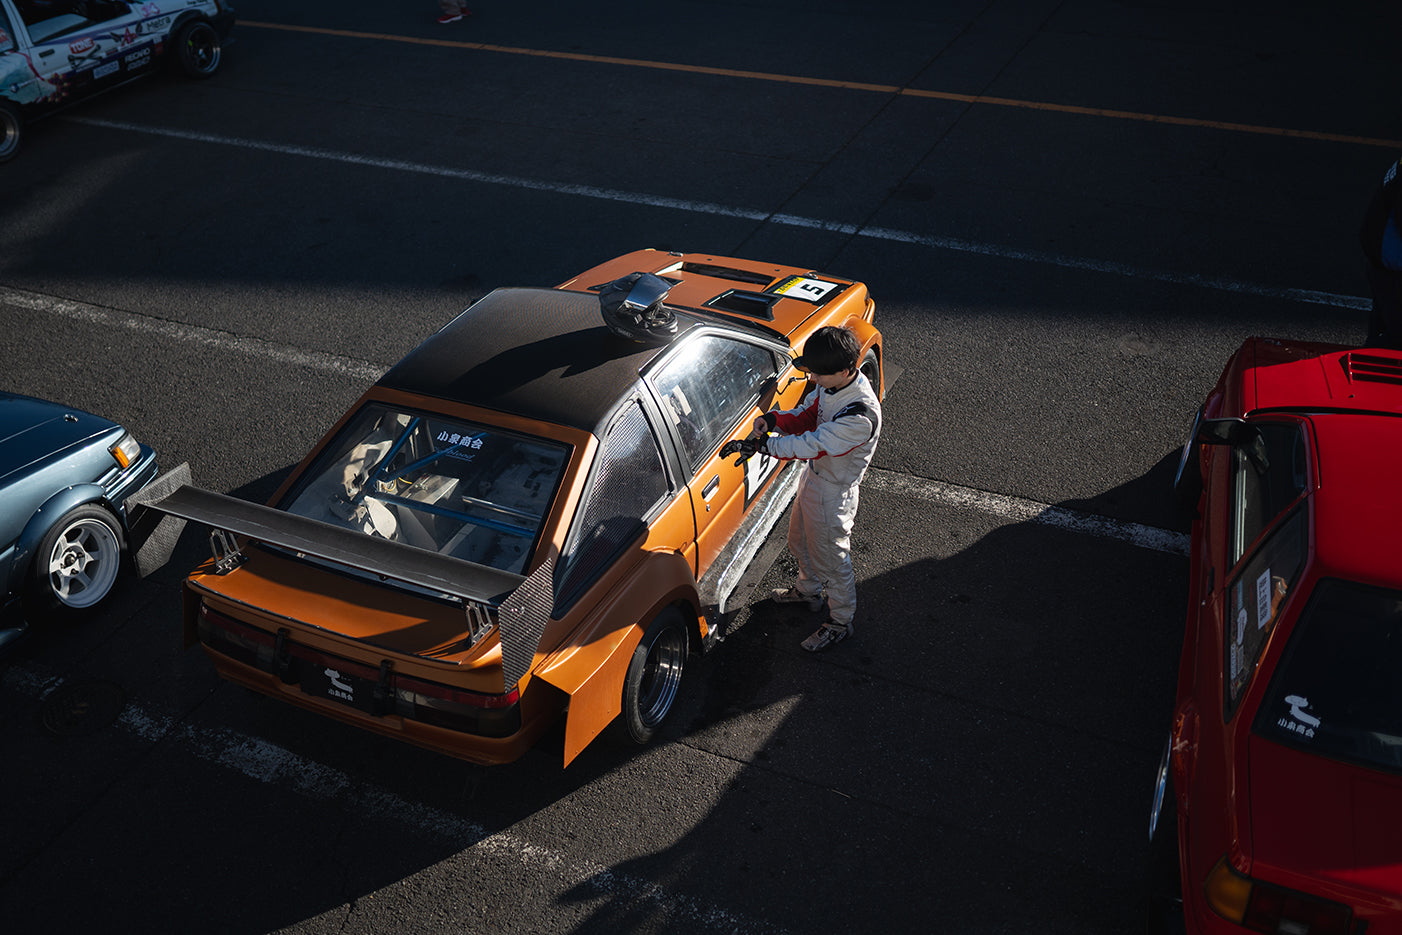 Calm Before the Run - AE86 Levin In The Pits At Tsukuba Circuit | Japan